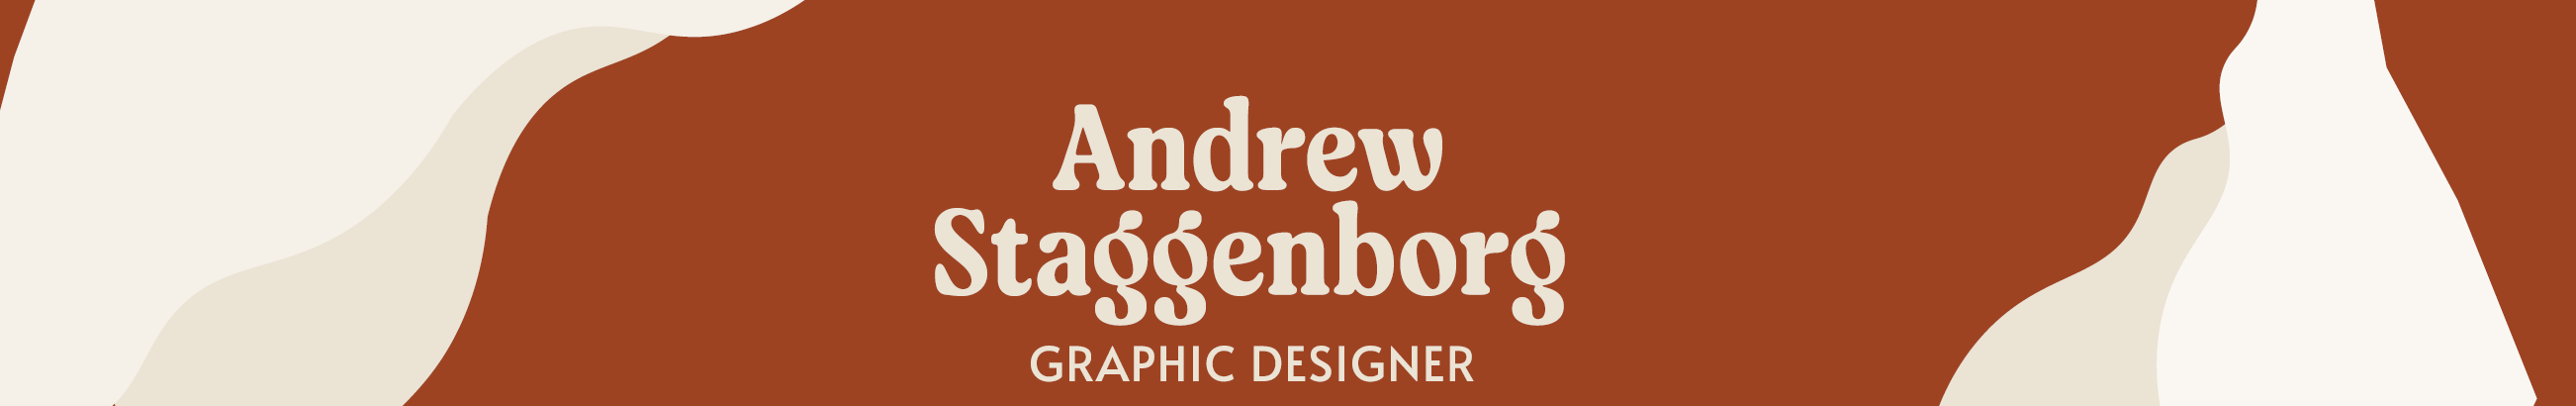 Andrew Staggenborg's profile banner